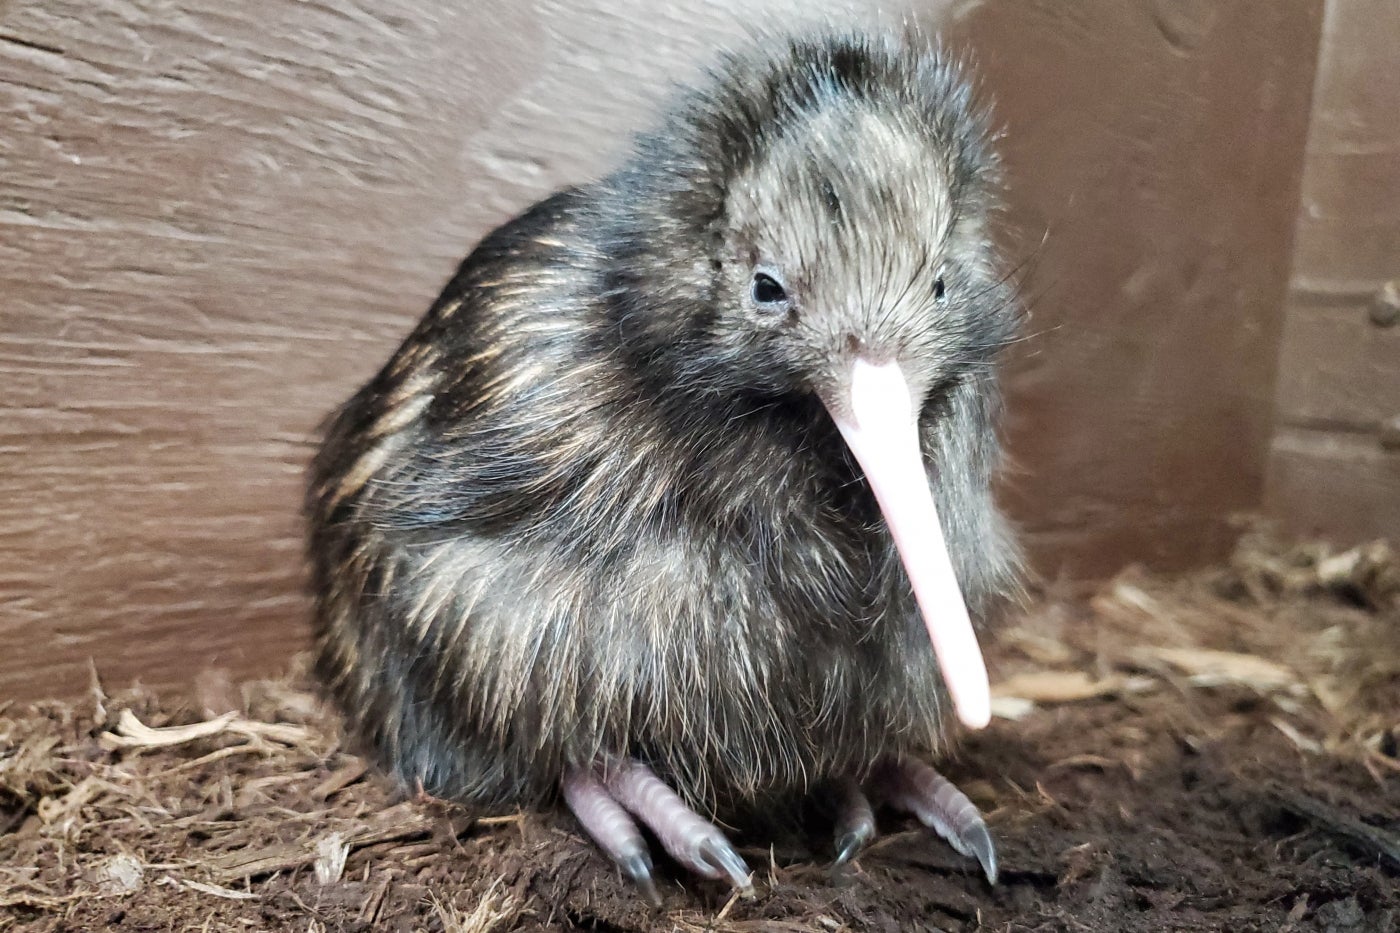 A wee kiwi! This chick hatched April 28 at the Smithsonian Conservation Biology Institute. 